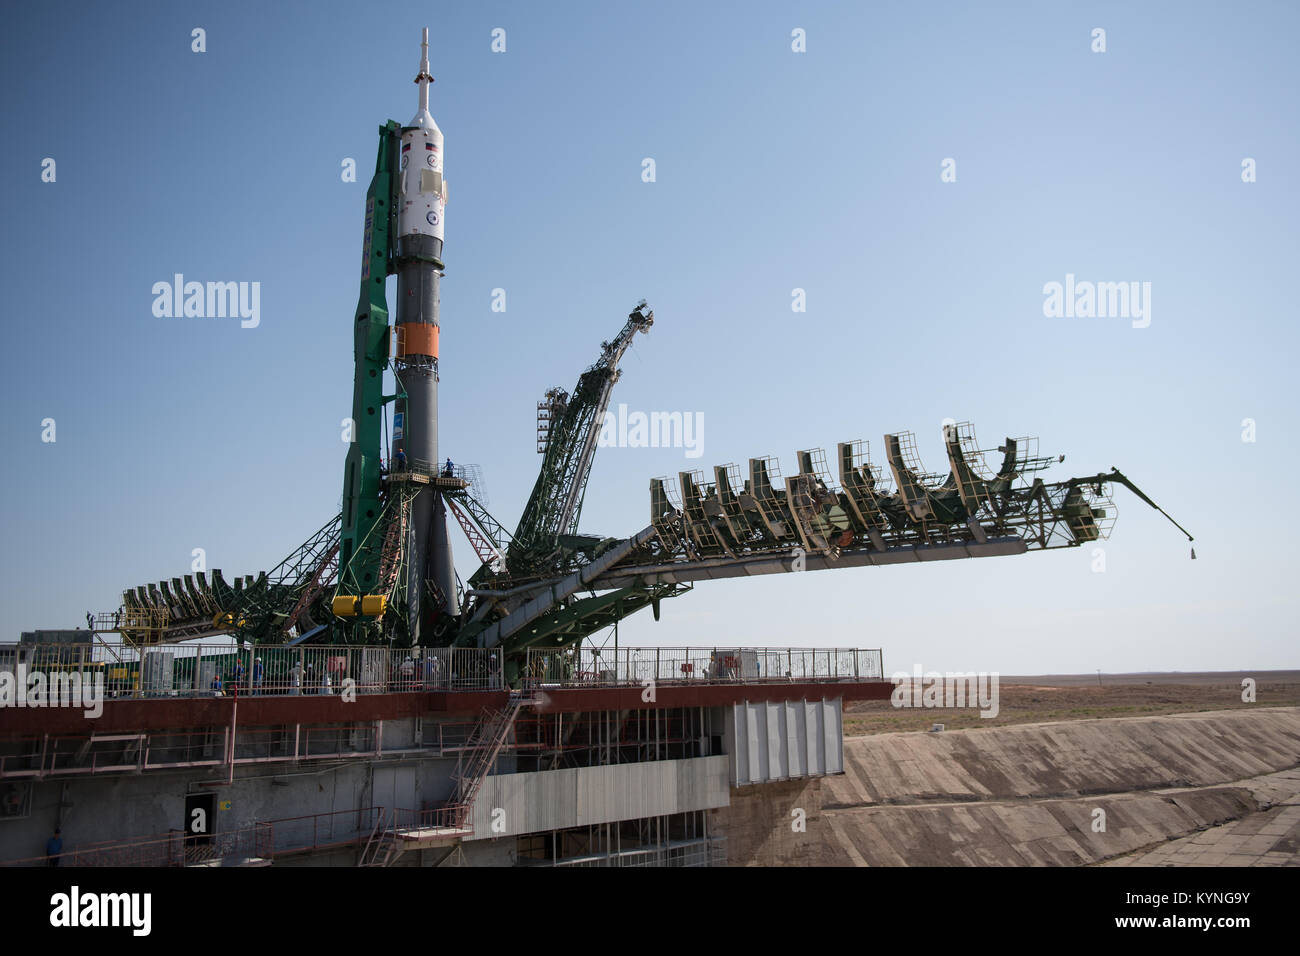 The Soyuz MS-05 spacecraft is seen after being raised into a vertical position on the launch pad at the Baikonur Cosmodrome, Kazakhstan, Wednesday, July 26, 2017.  Expedition 52 flight engineer Sergei Ryazanskiy of Roscosmos, flight engineer Randy Bresnik of NASA, and flight engineer Paolo Nespoli of ESA (European Space Agency), are scheduled to launch to the International Space Station aboard the Soyuz spacecraft from the Baikonur Cosmodrome on July 28.  Photo Credit: (NASA/Joel Kowsky) Stock Photo